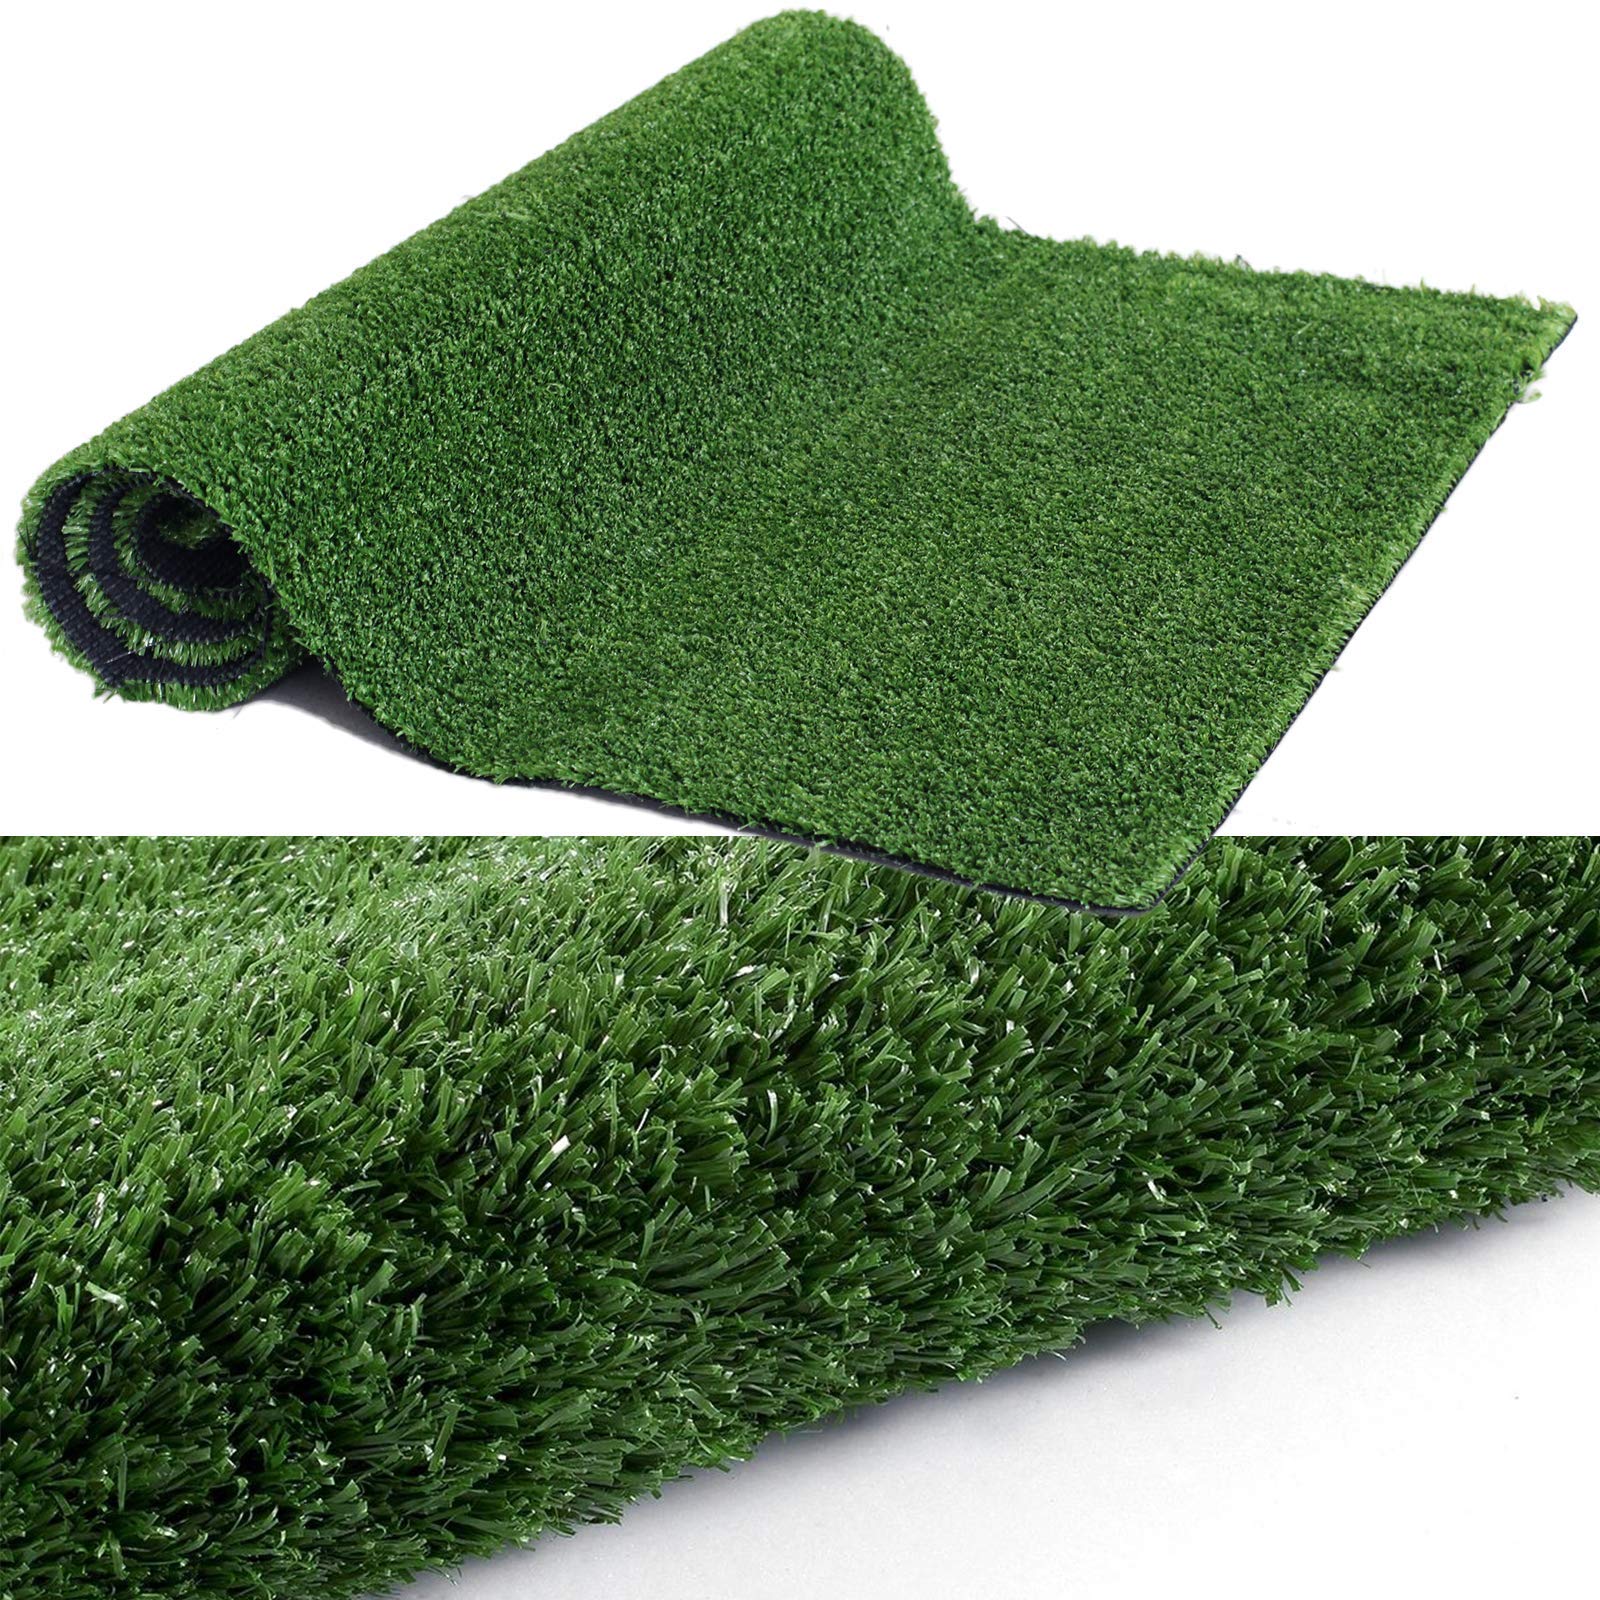 Goasis Lawn Artificial Grass Turf Lawn - 12Ftx80Ft(960 Square Ft) Indoor Outdoor Garden Lawn Landscape Synthetic Grass Mat